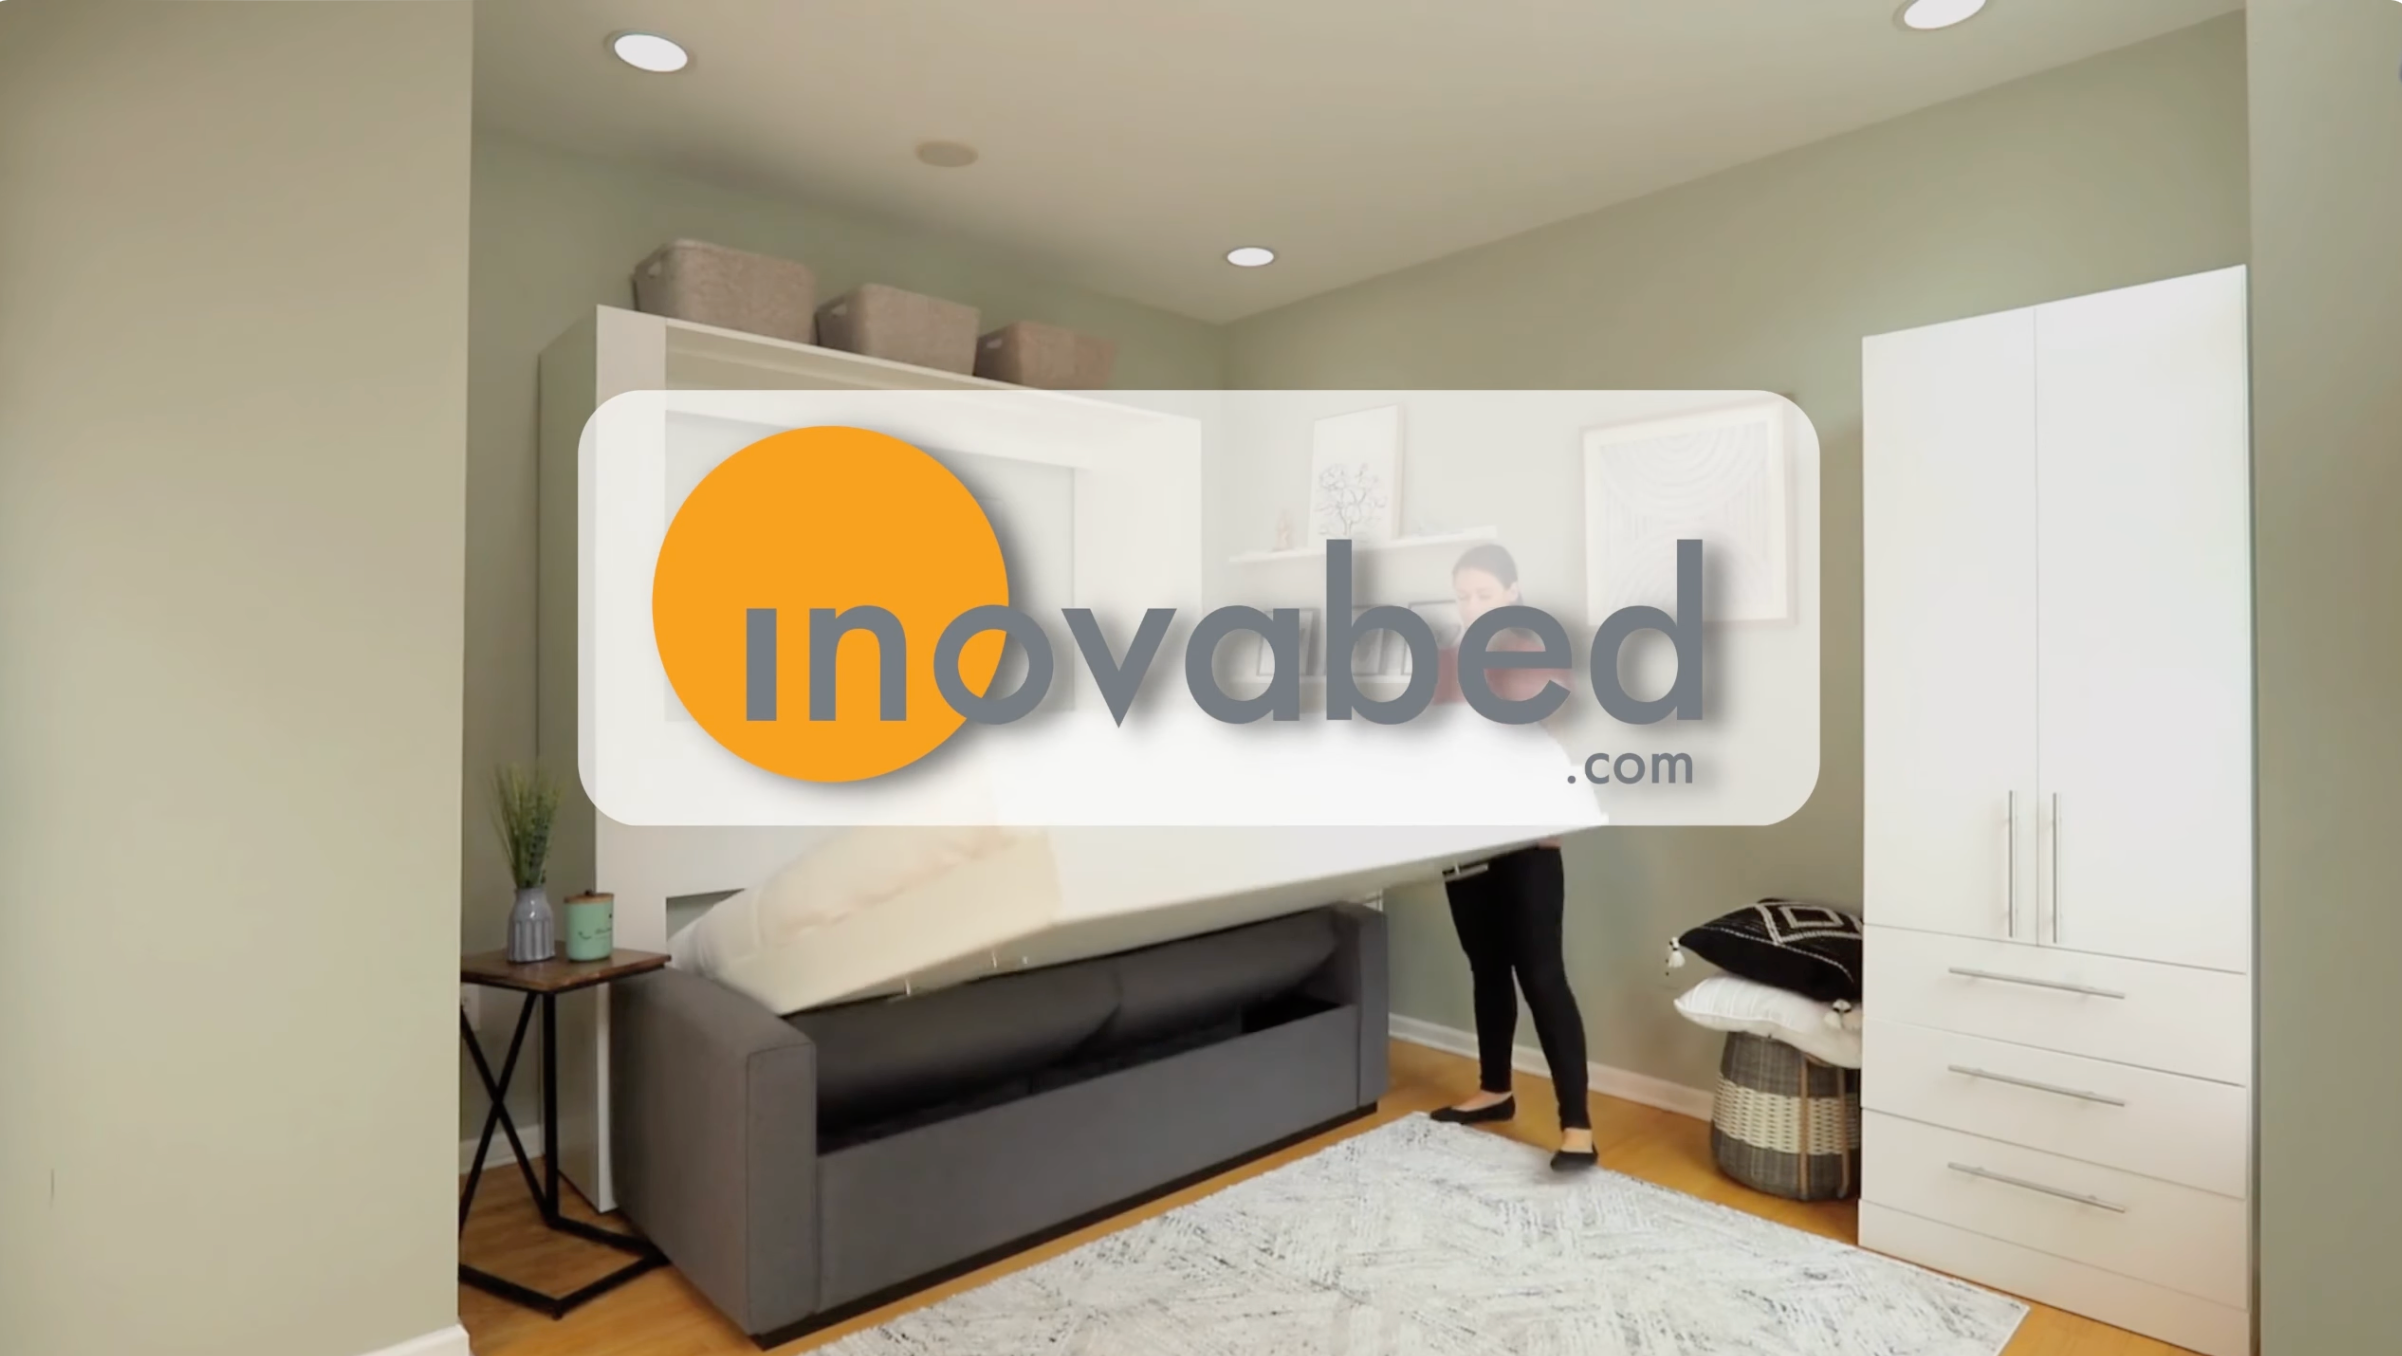 Load video: Learn more about Inovabed&#39;s customer experience!